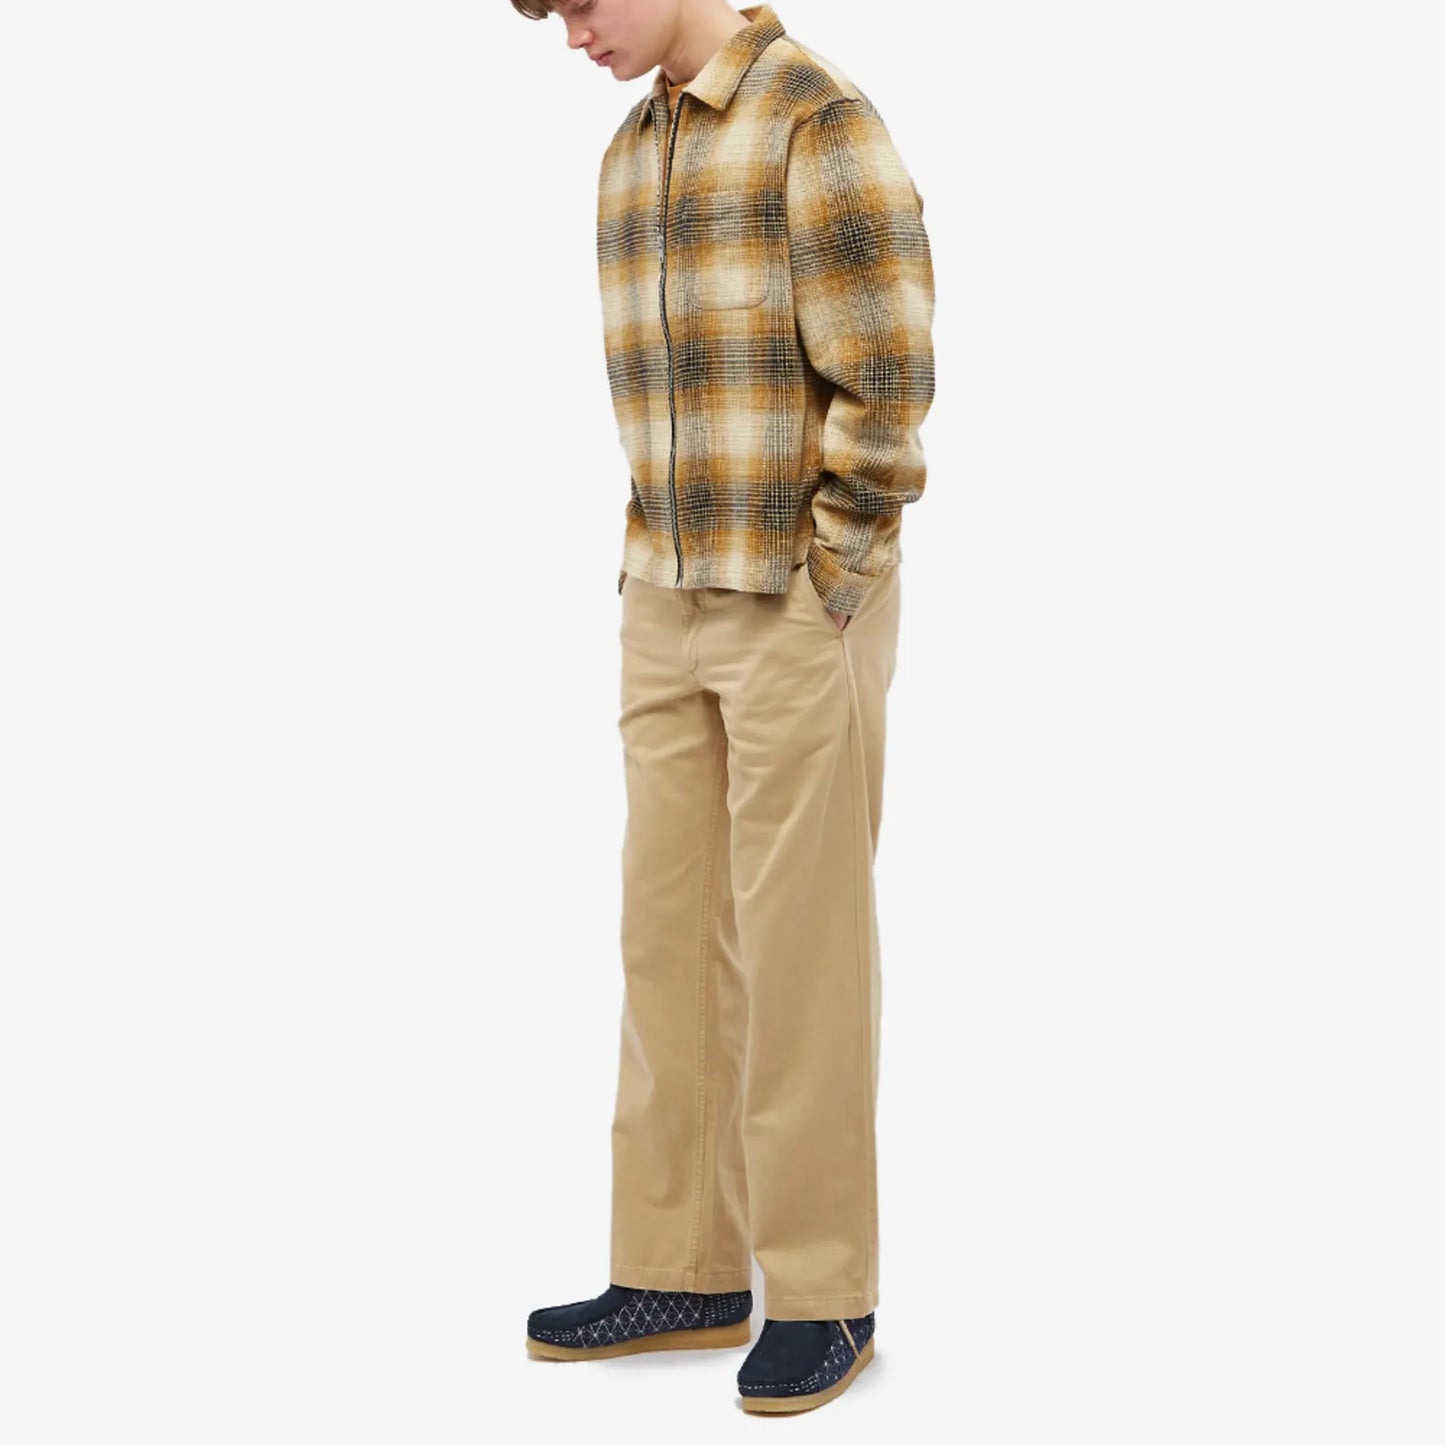 General Admission - GENERAL ADMISSION PICO PANT IN KHAKI - Rent With Thred